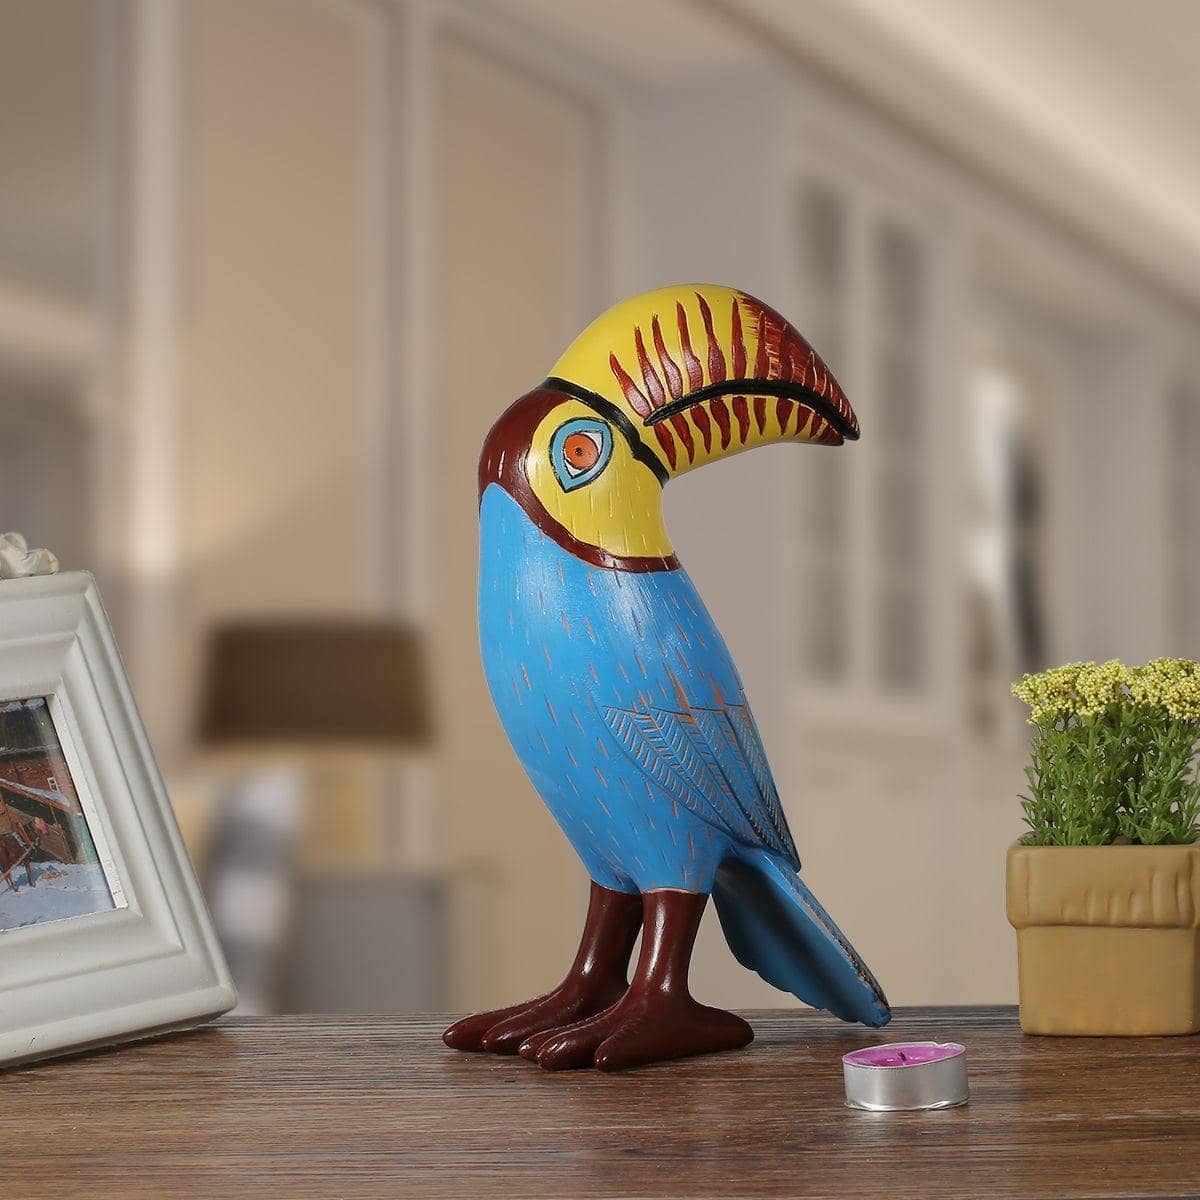 Toucan Bird Modern Decor - Tropical Vibes with Big Mouth - Stylish Home Accent